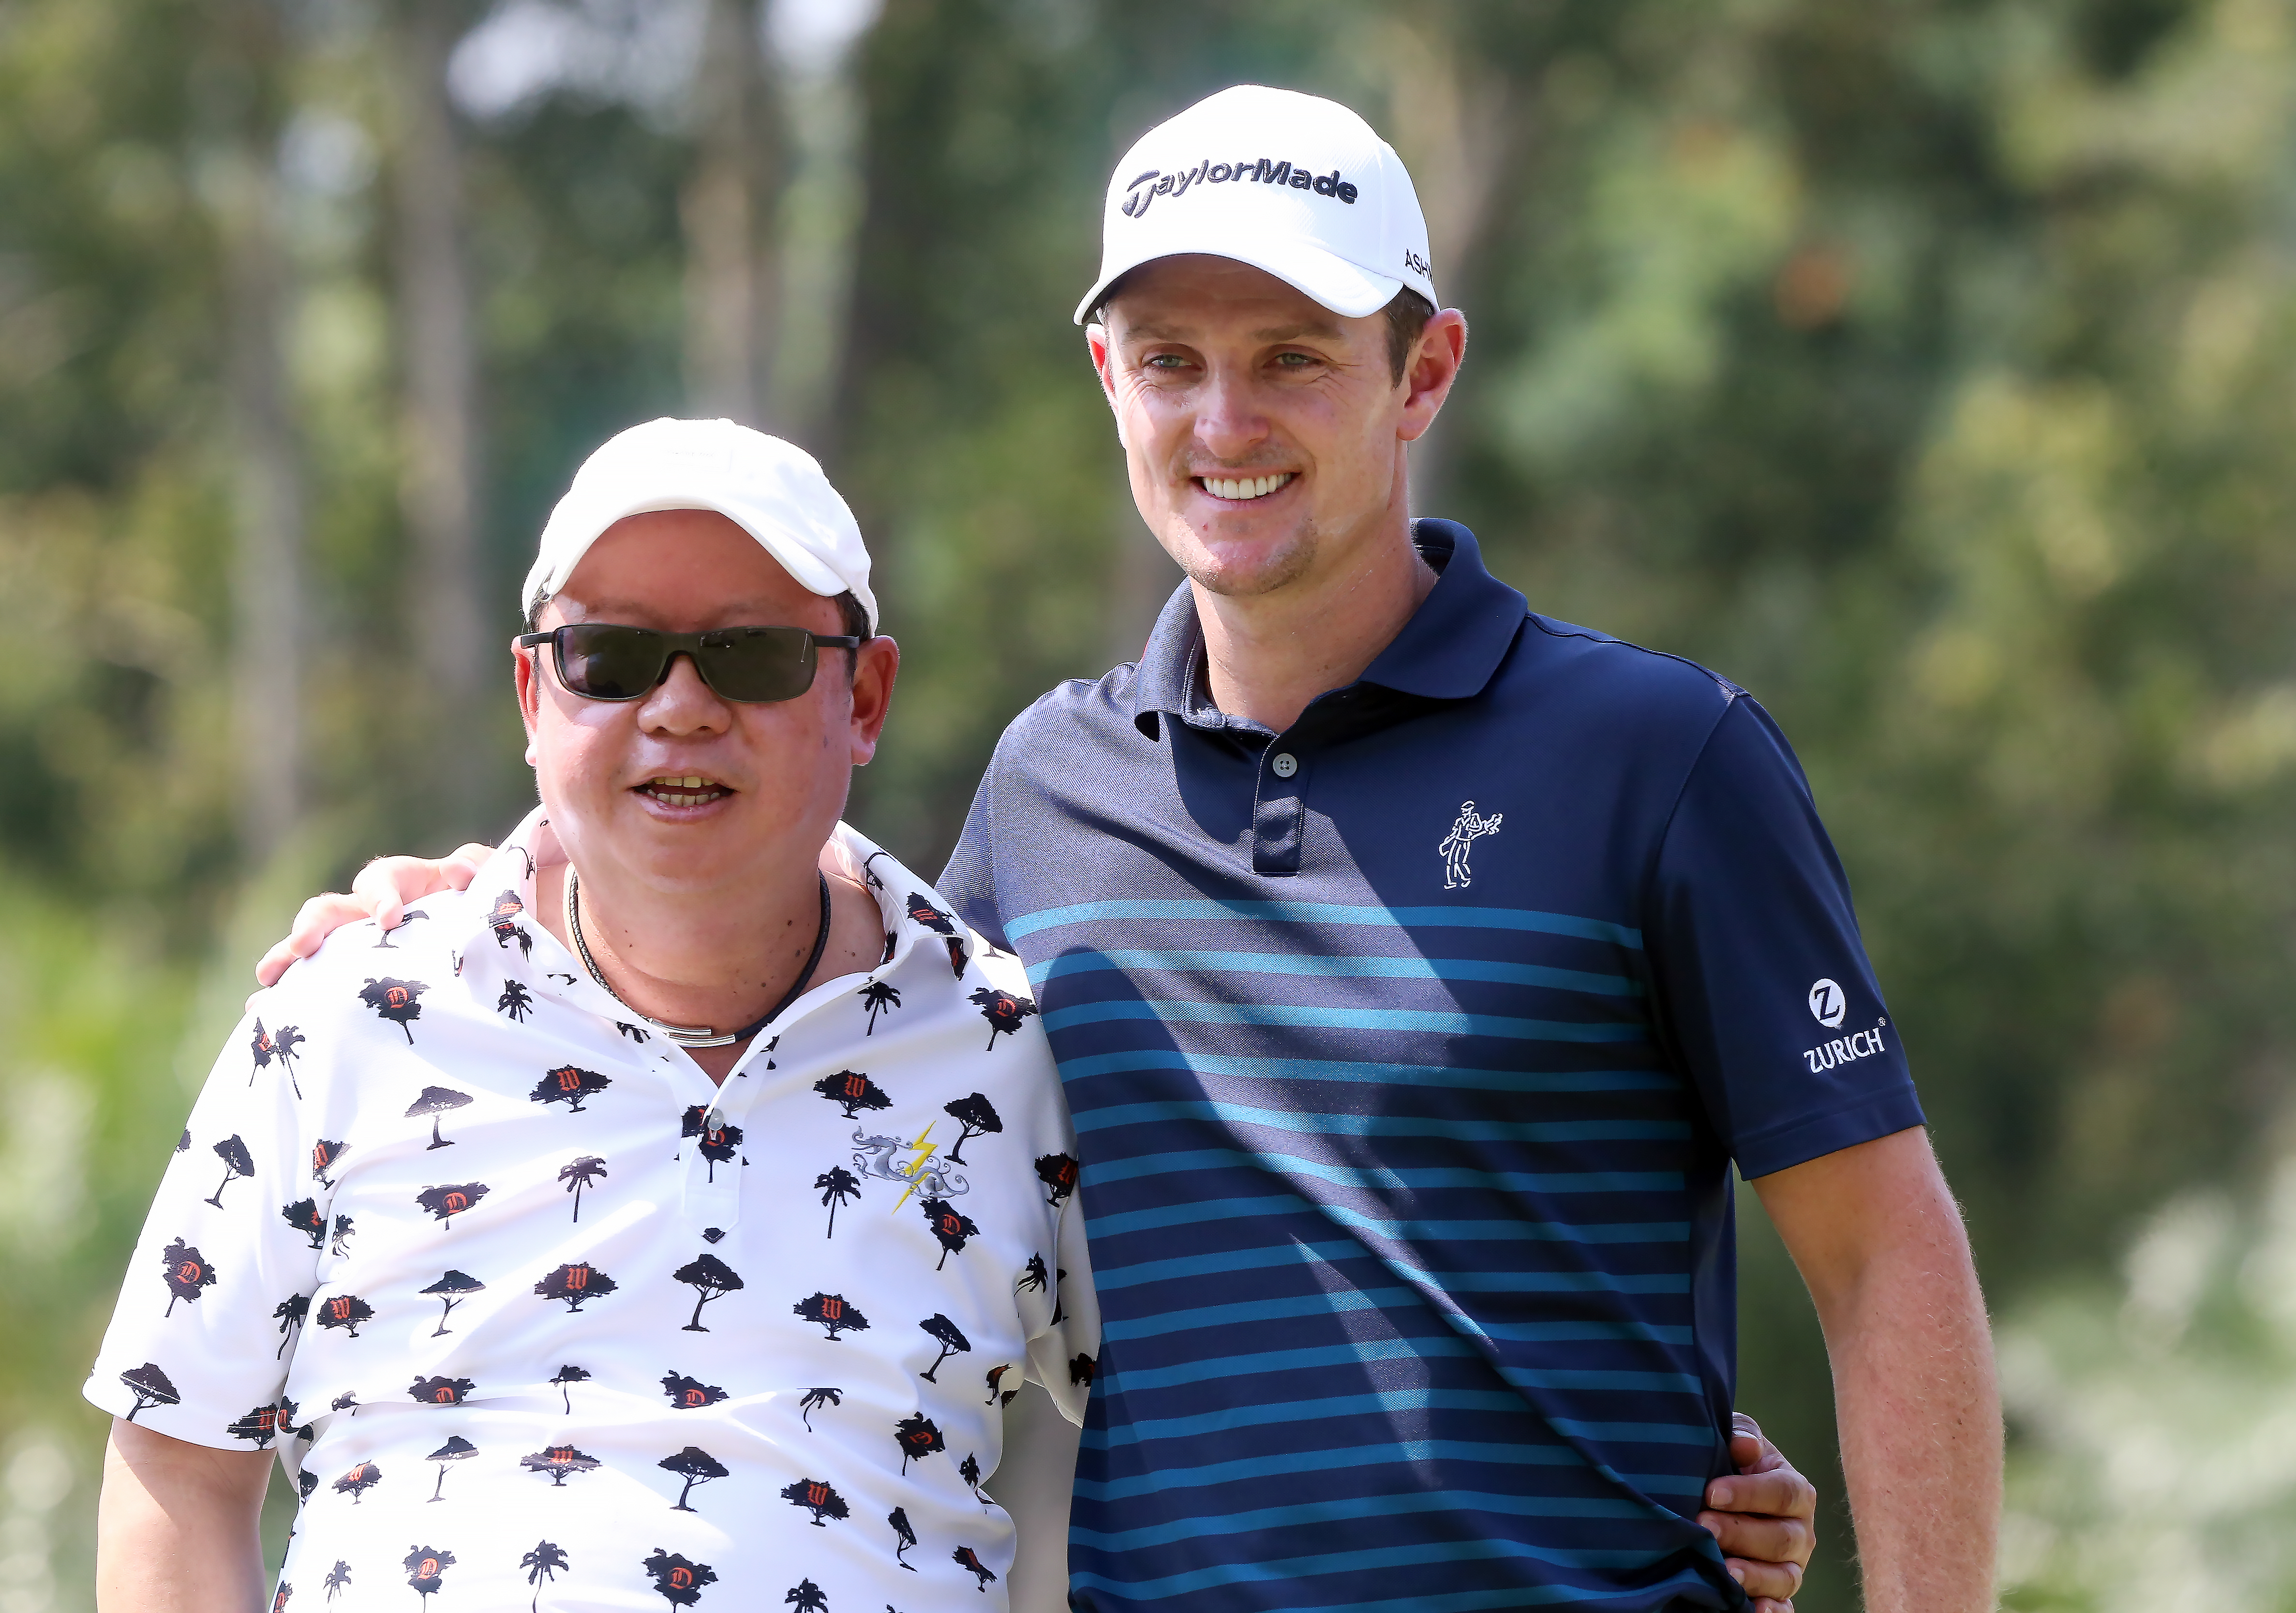 Hong Kong Tourism Board chairman Peter Lam Kin-ngok gets in on the act in a pose with English golfer Justin Rose on Wednesday ahead of the Hong Kong Open. Photos: K.Y. Cheng